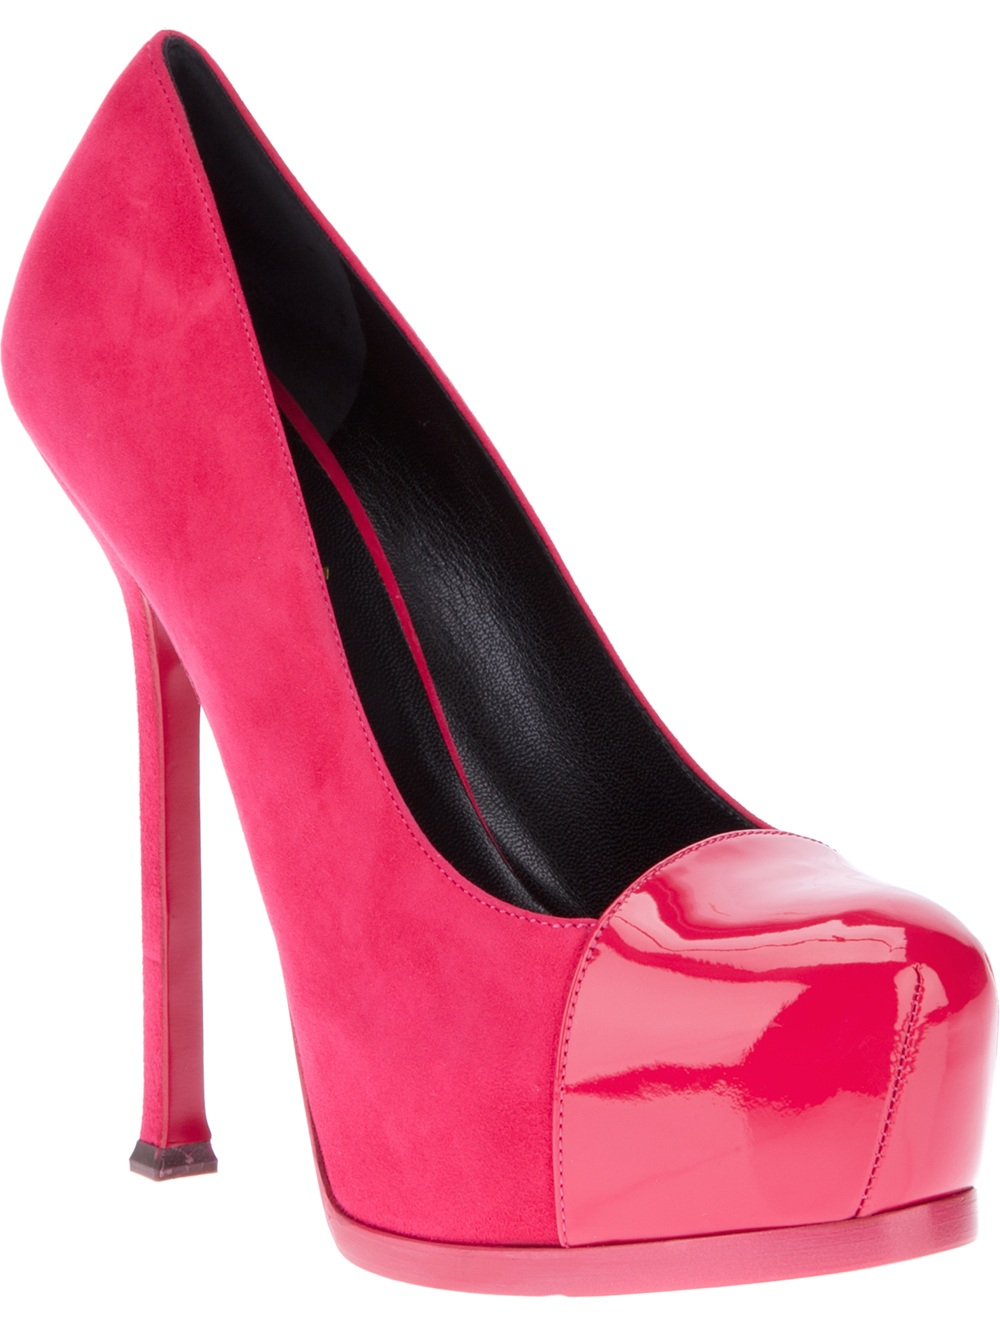 Lyst - Saint Laurent 'Tributoo' Pumps in Pink